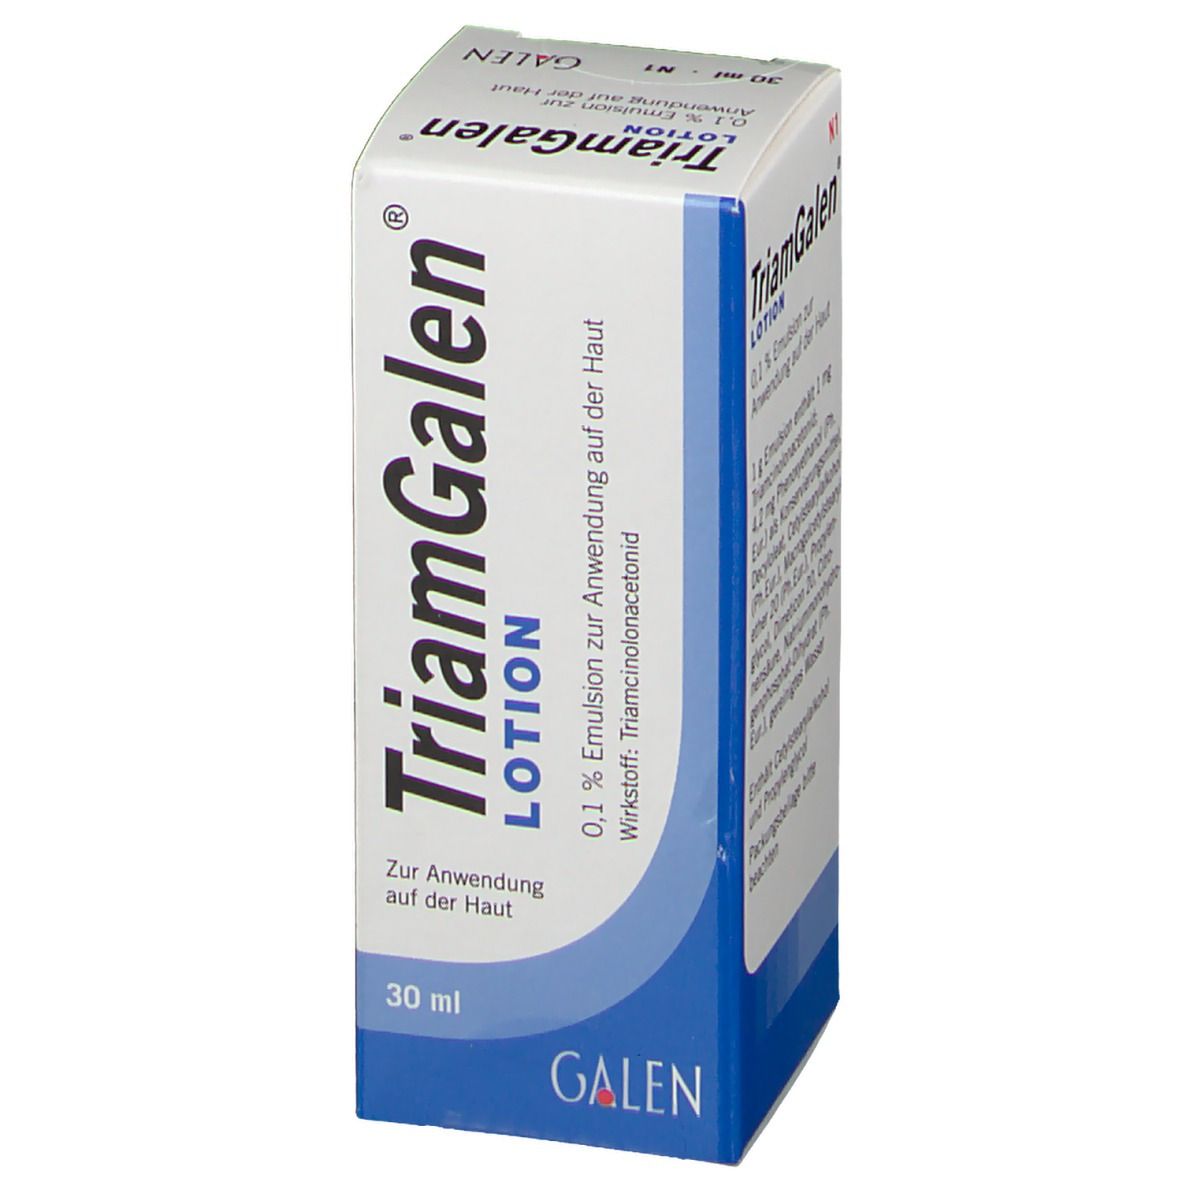 TriamGalen® Lotion